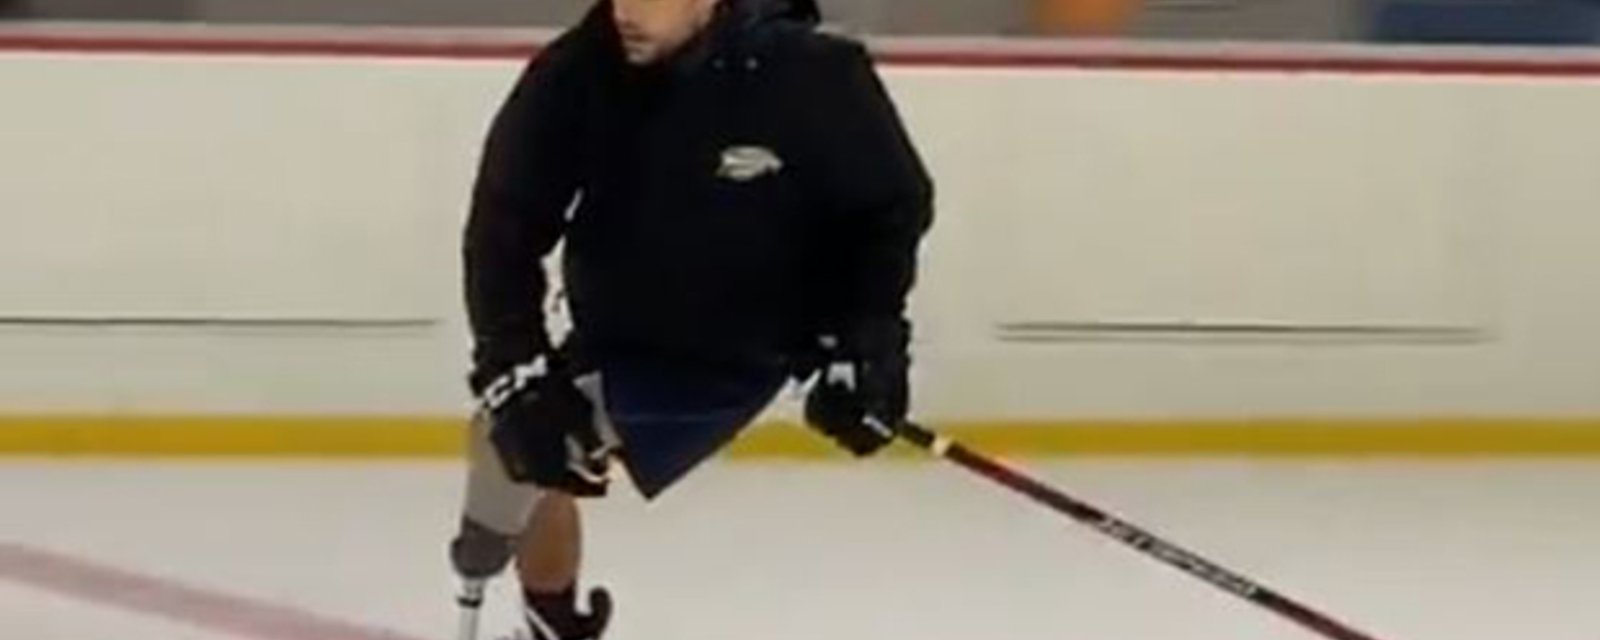 Cunningham shocked by reaction from viral video of him skating with prosthetic leg